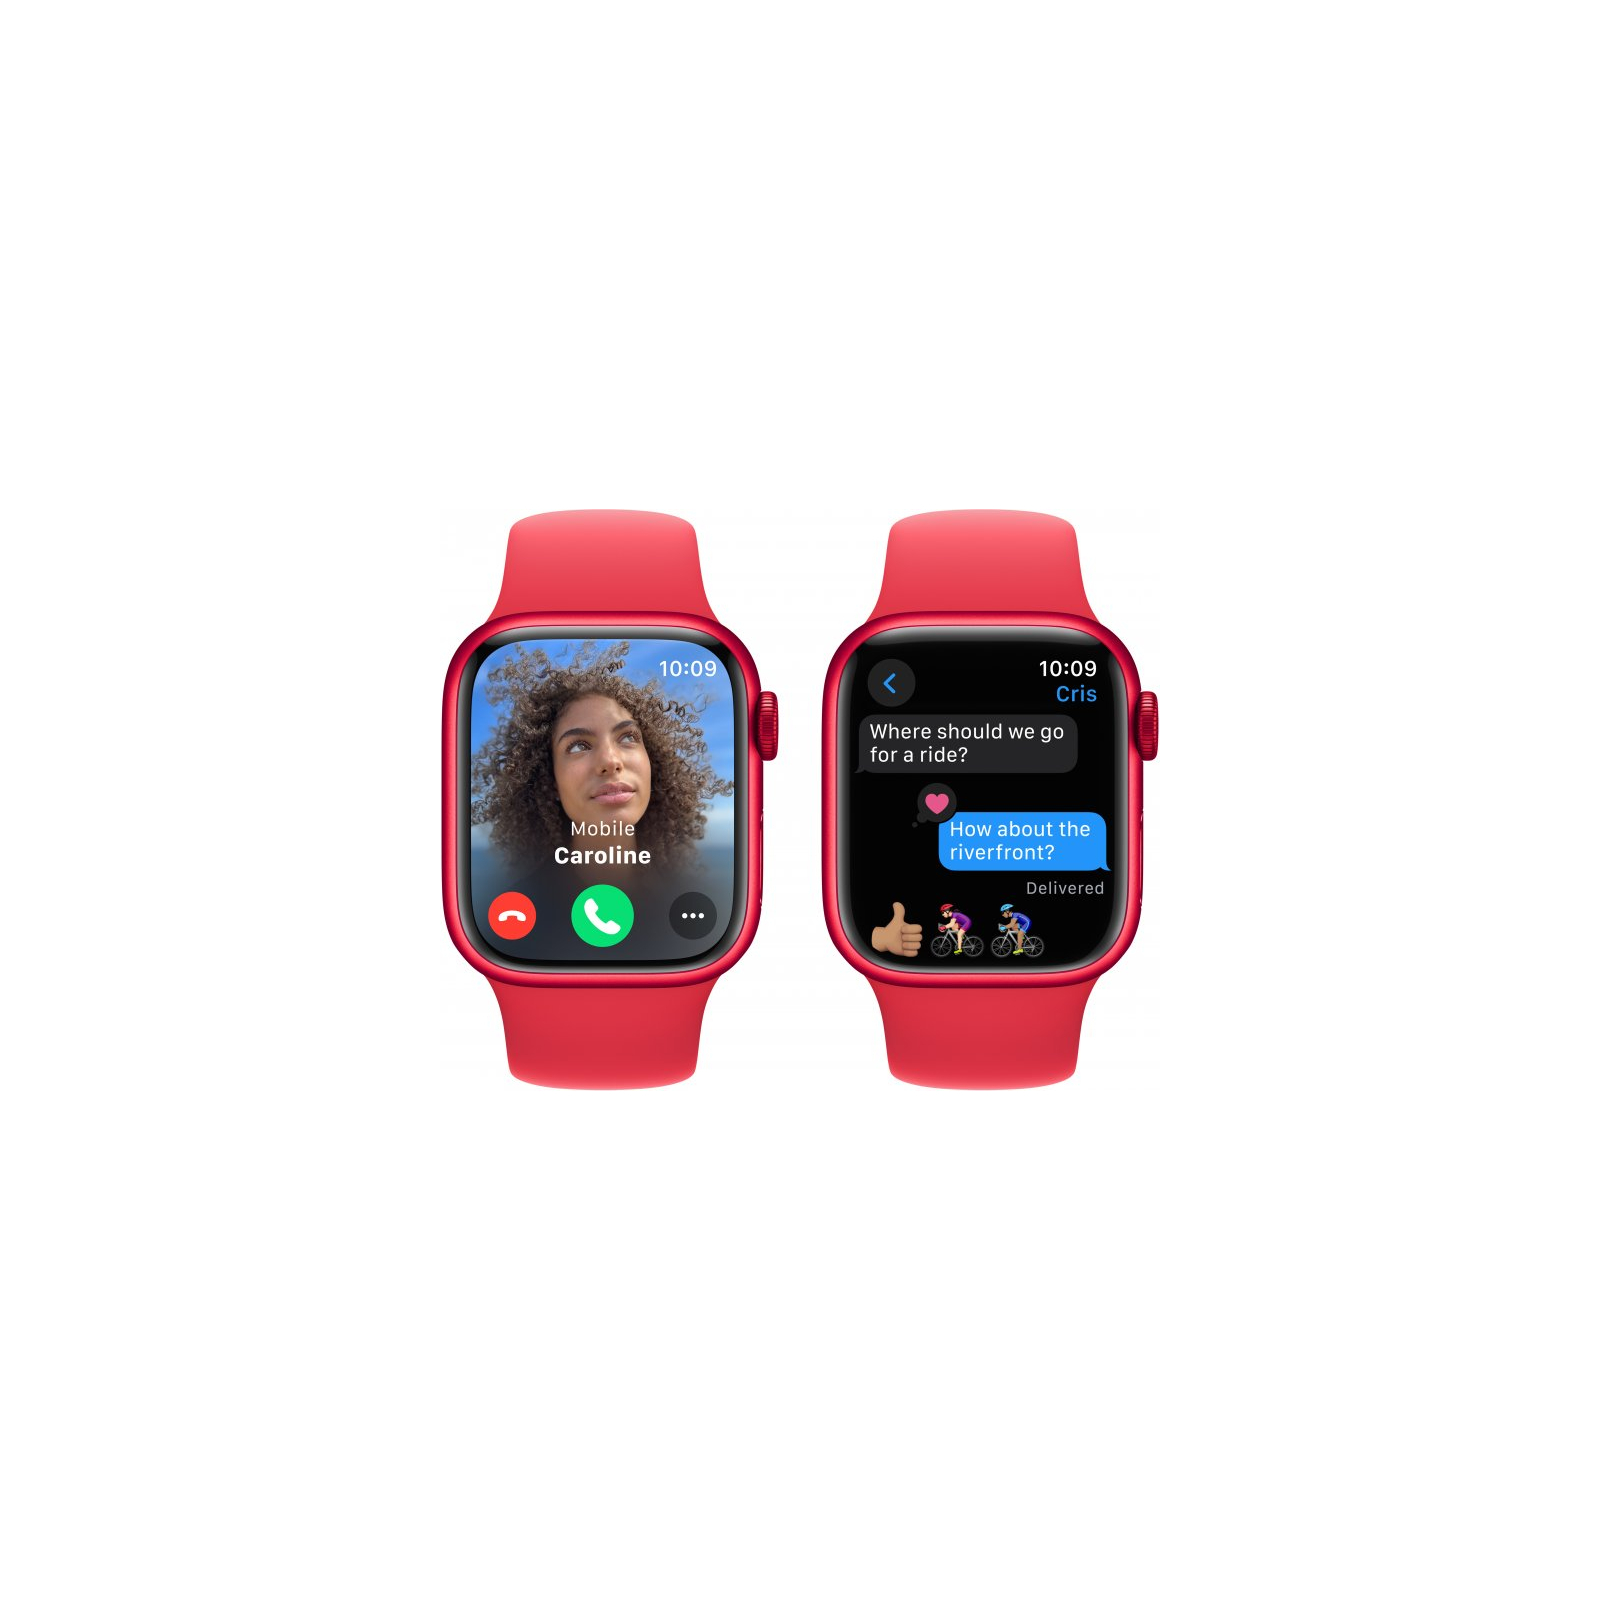 Смарт-годинник Apple Watch Series 9 GPS 41mm (PRODUCT)RED Aluminium Case with (PRODUCT)RED Sport Band - S/M (MRXG3QP/A) зображення 6